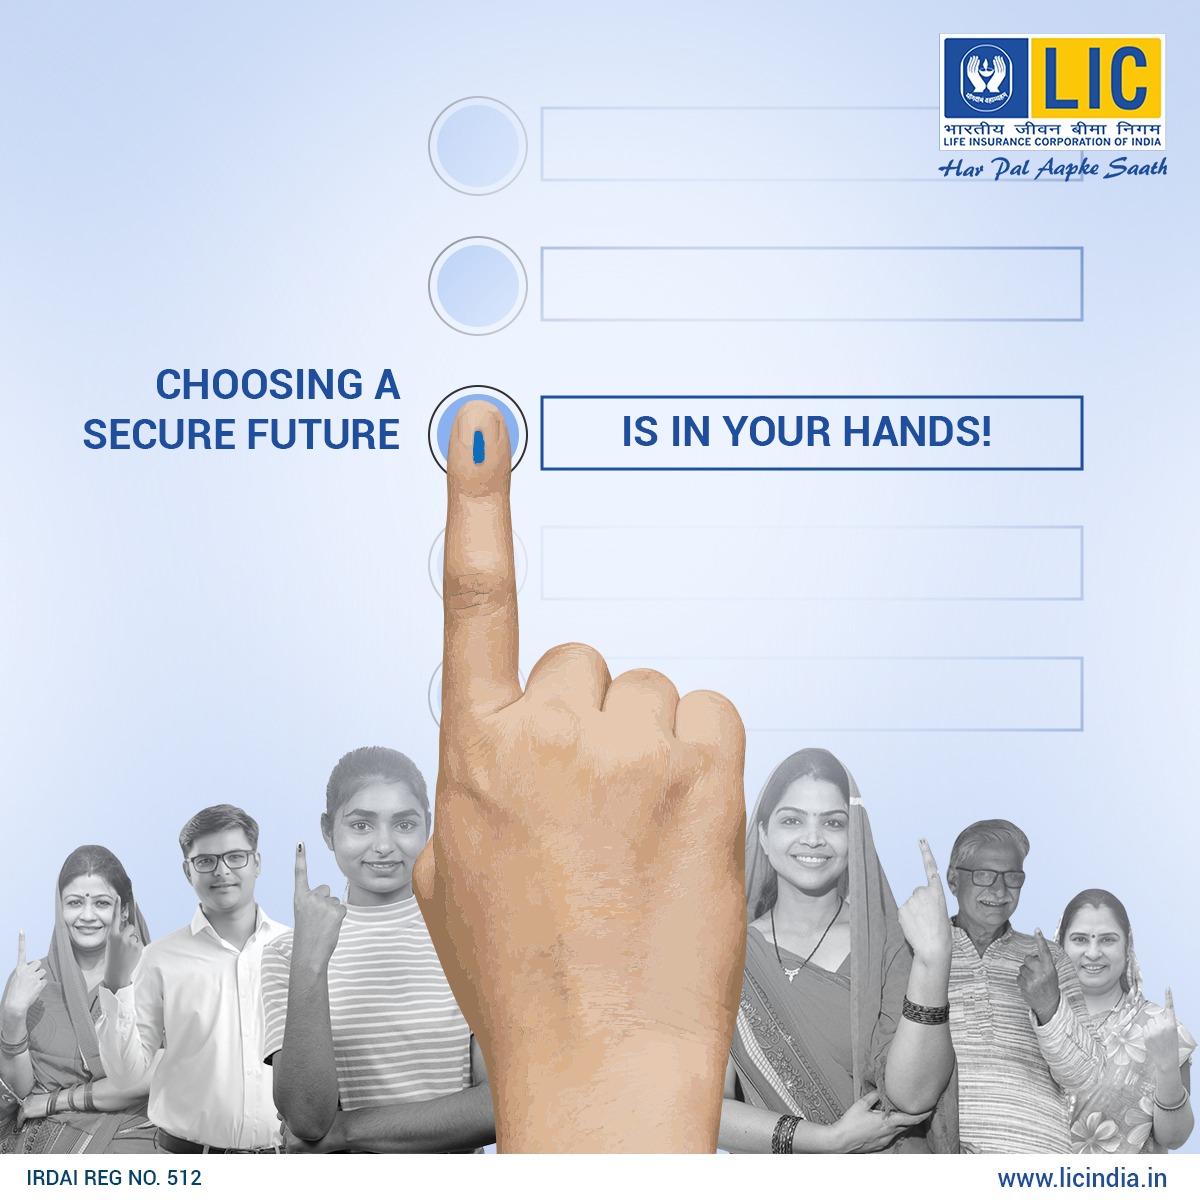 Your vote shapes tomorrow's security. With LIC, ensure a stable future. #LIC